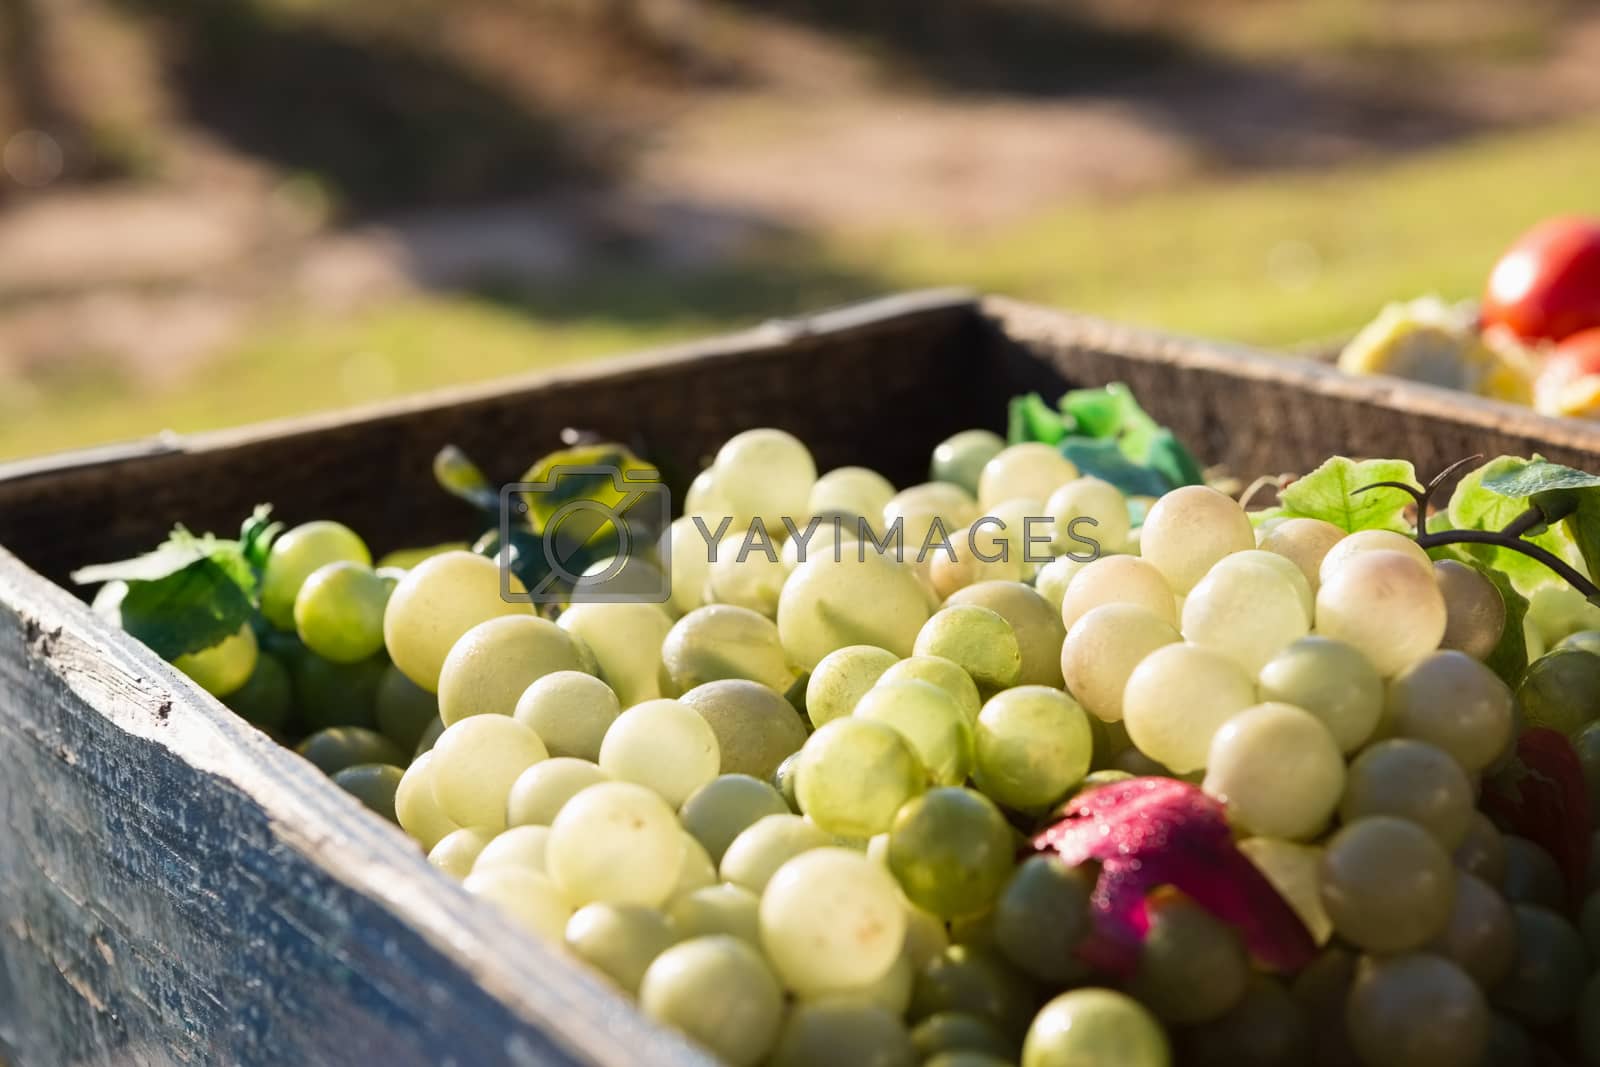 Royalty free image of Harvested grapes in crate at vineyard by Wavebreakmedia